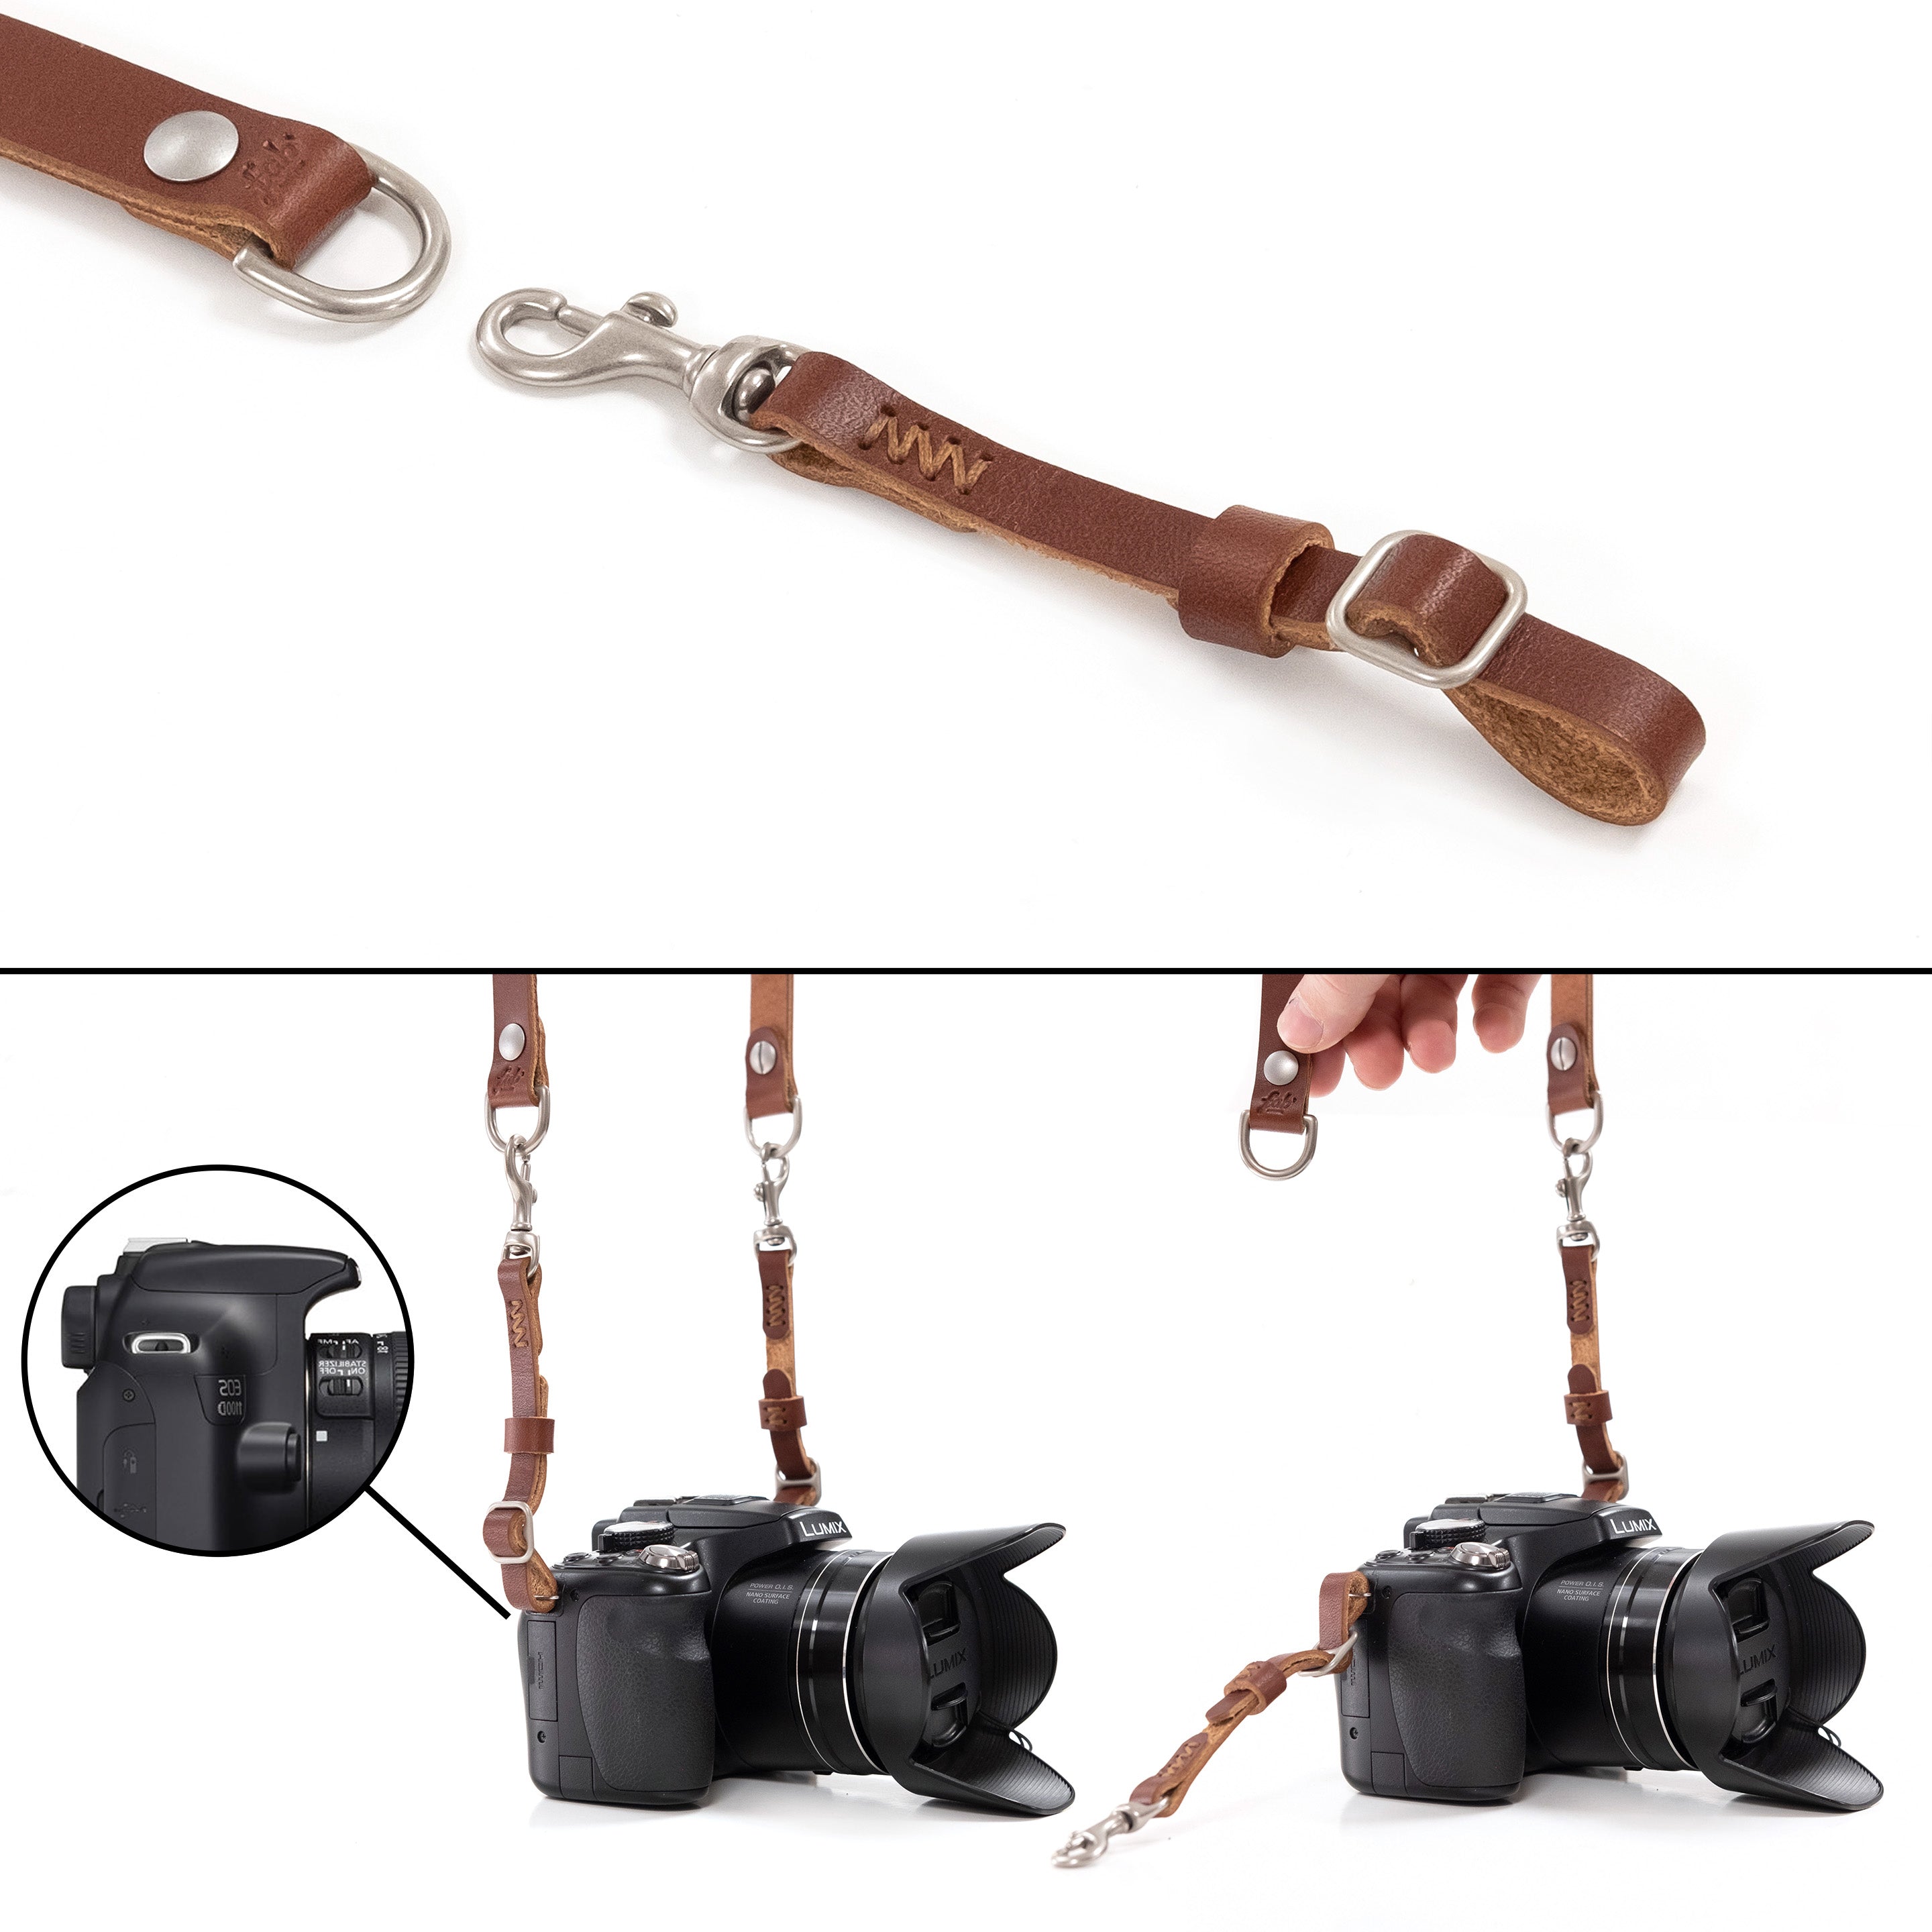 Fab' F11 strap - Brown leather - Size M-L (47")